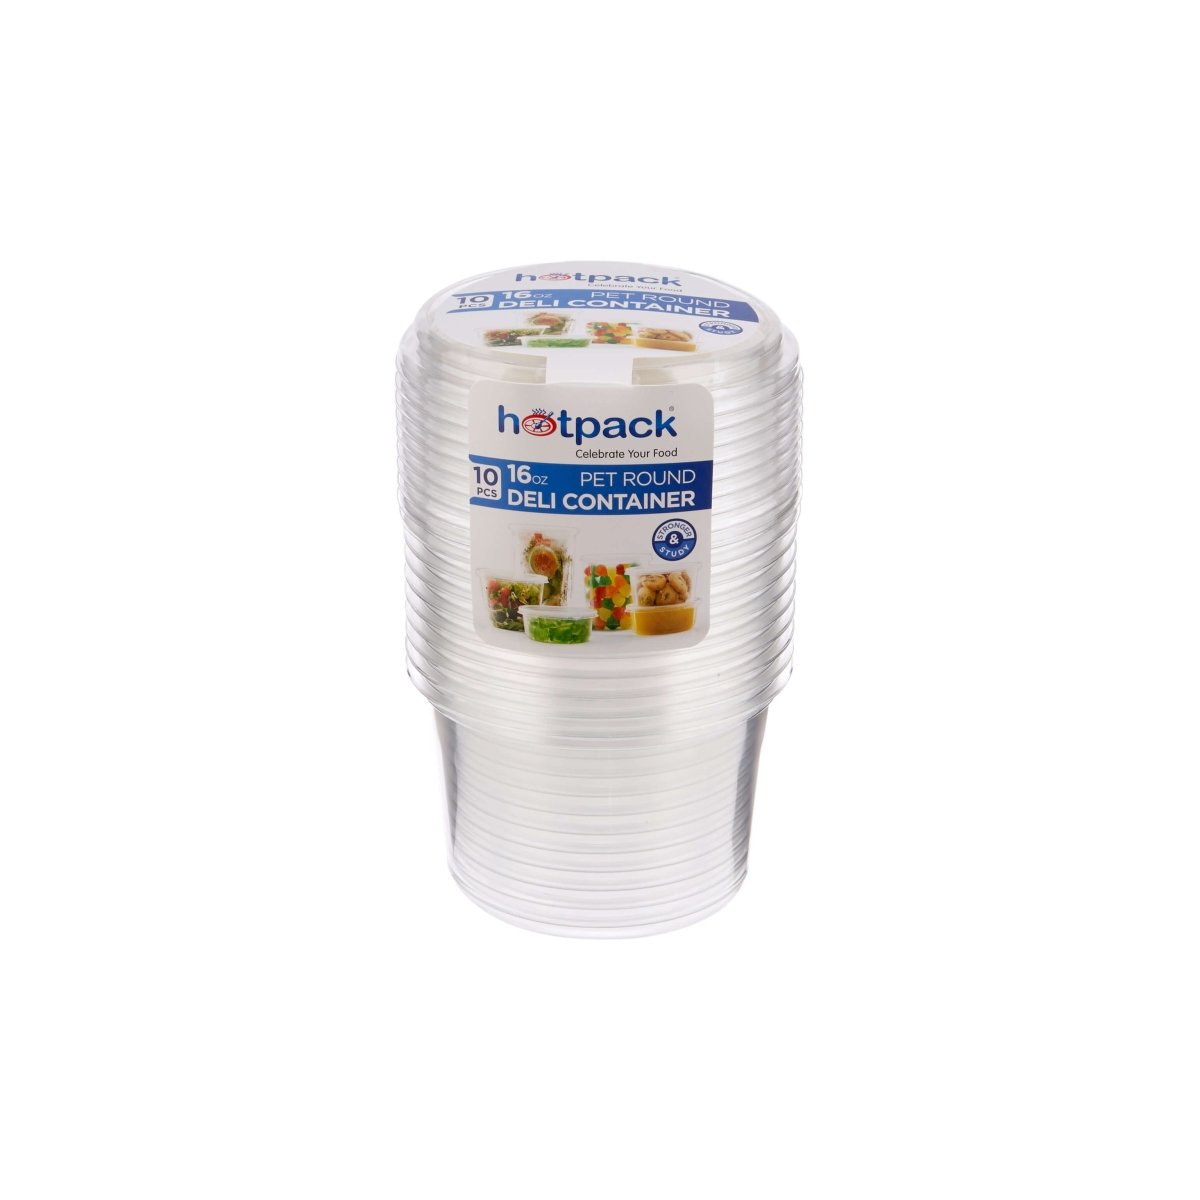 Round Deli Containers - hotpackwebstore.com - Deli Containers